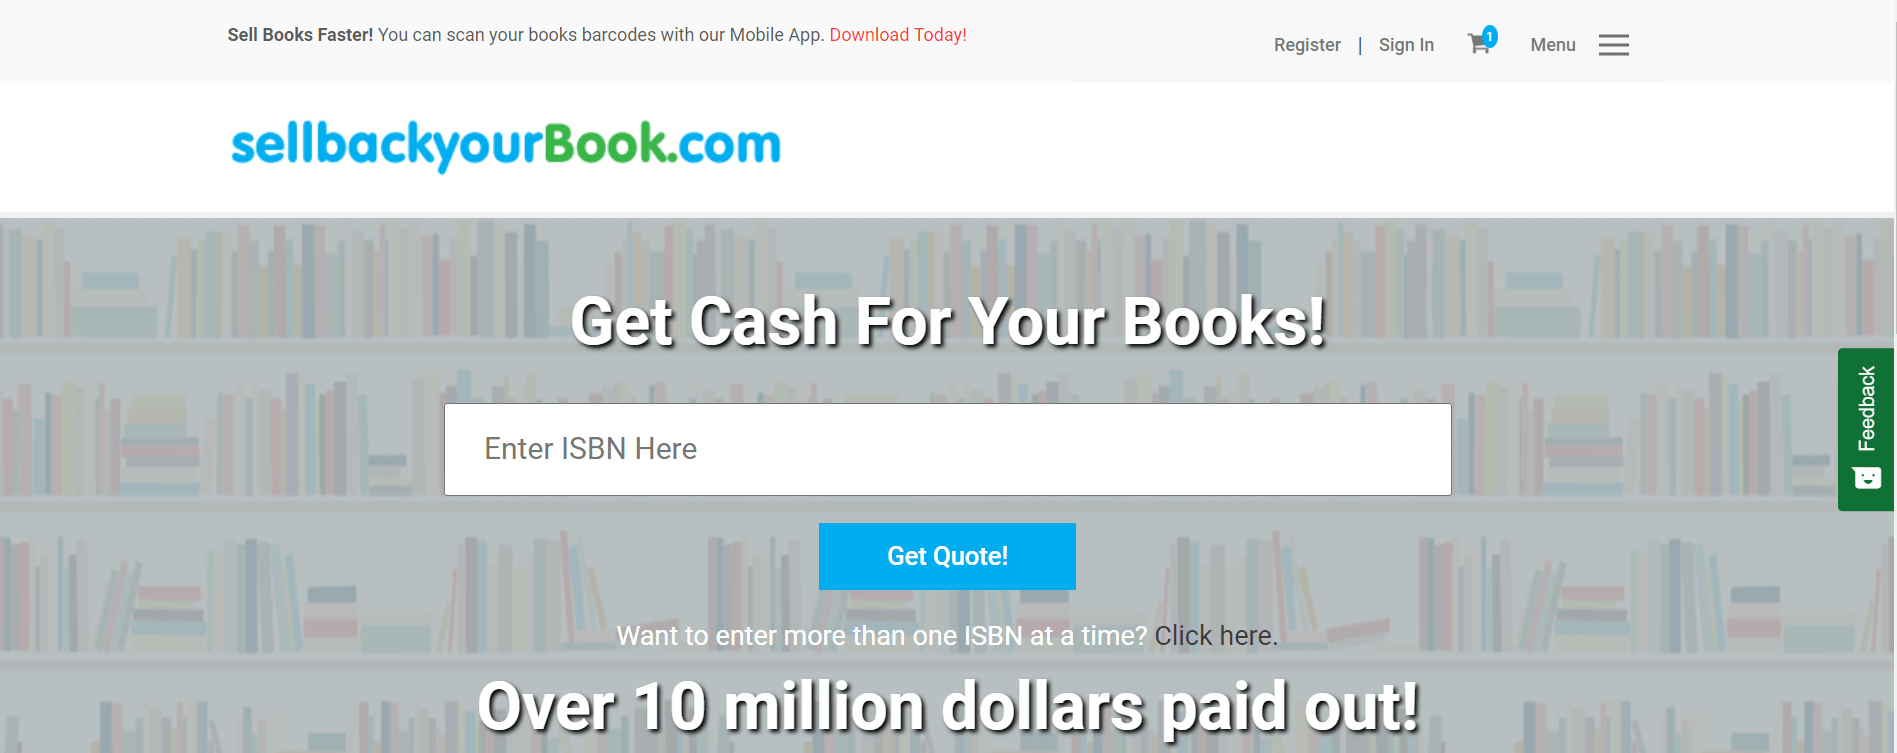 sell back your book